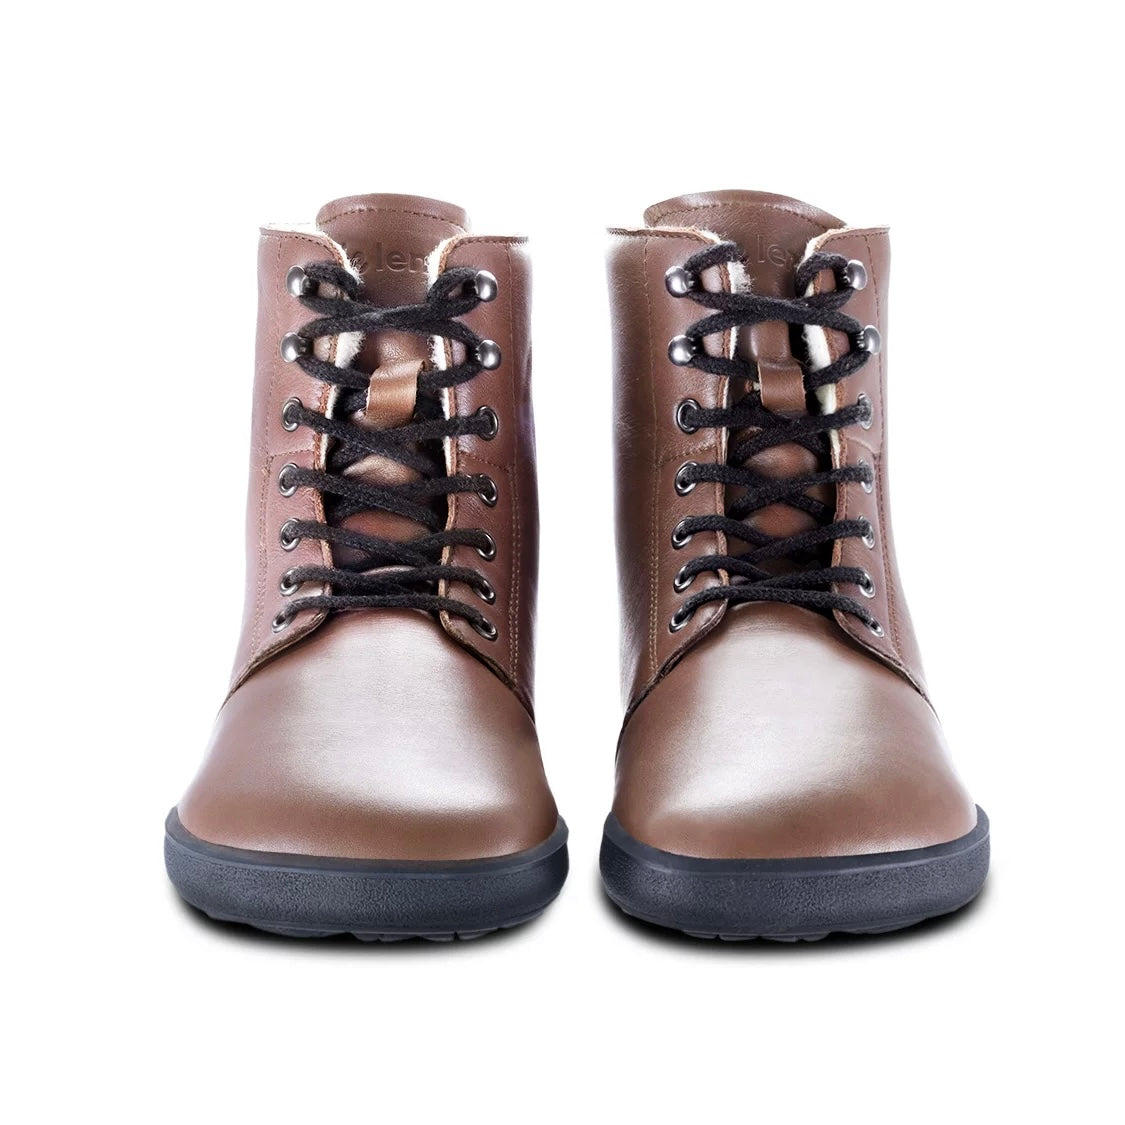 A photo of Be Lenka Winter Neo boots made with leather and rubber soles. The boots are brown in color and a lace up style with wool inside. Both boots are shown beside each other from the front against a white background. #color_brown-smooth-leather